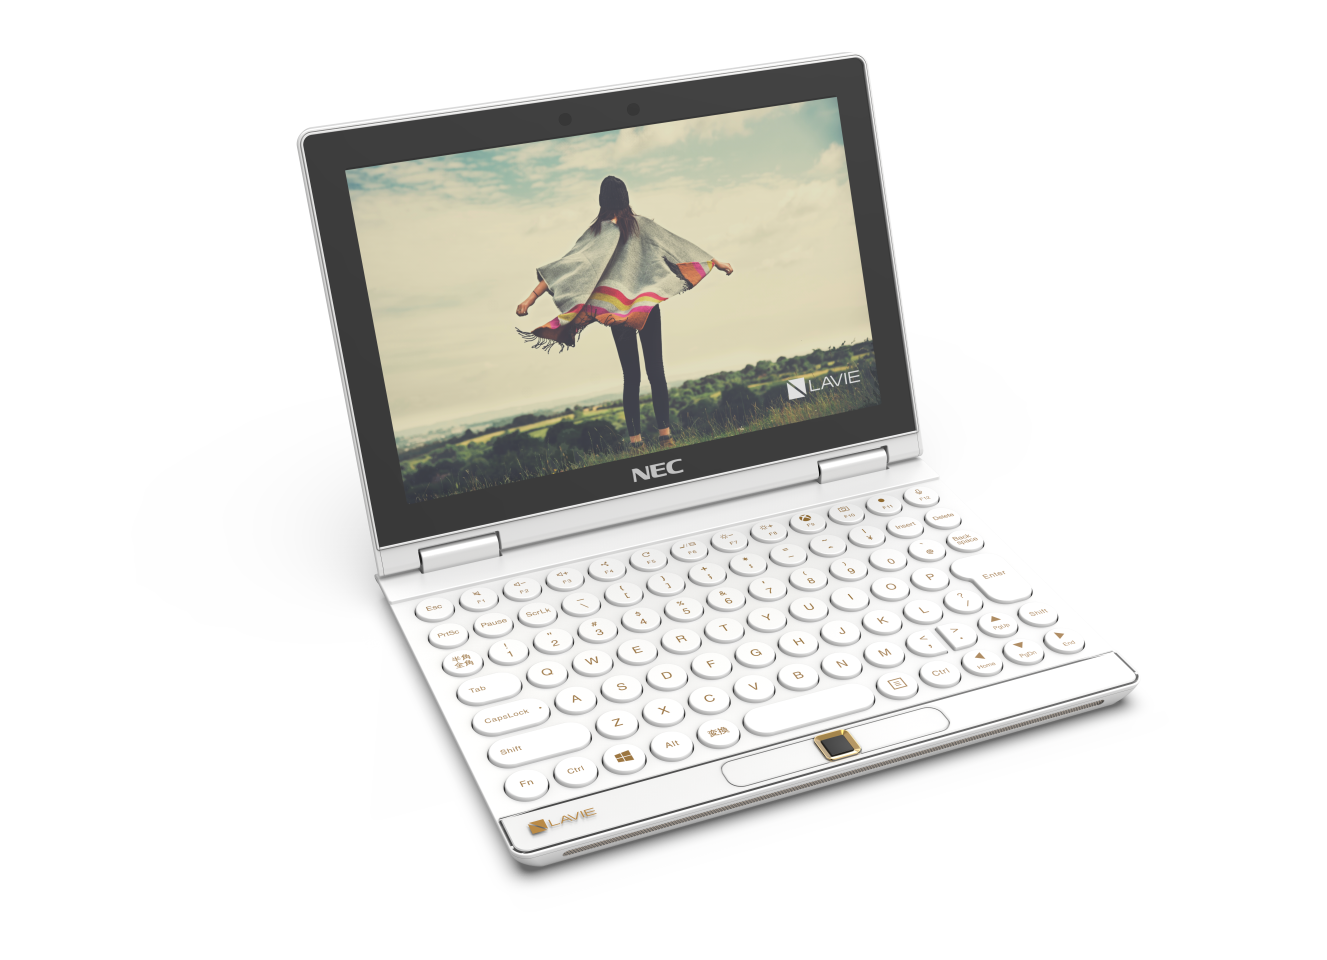 The Lavie Mini sports an 8-inch WUXGA touchscreen and keyboard with circular keys and blacklighting